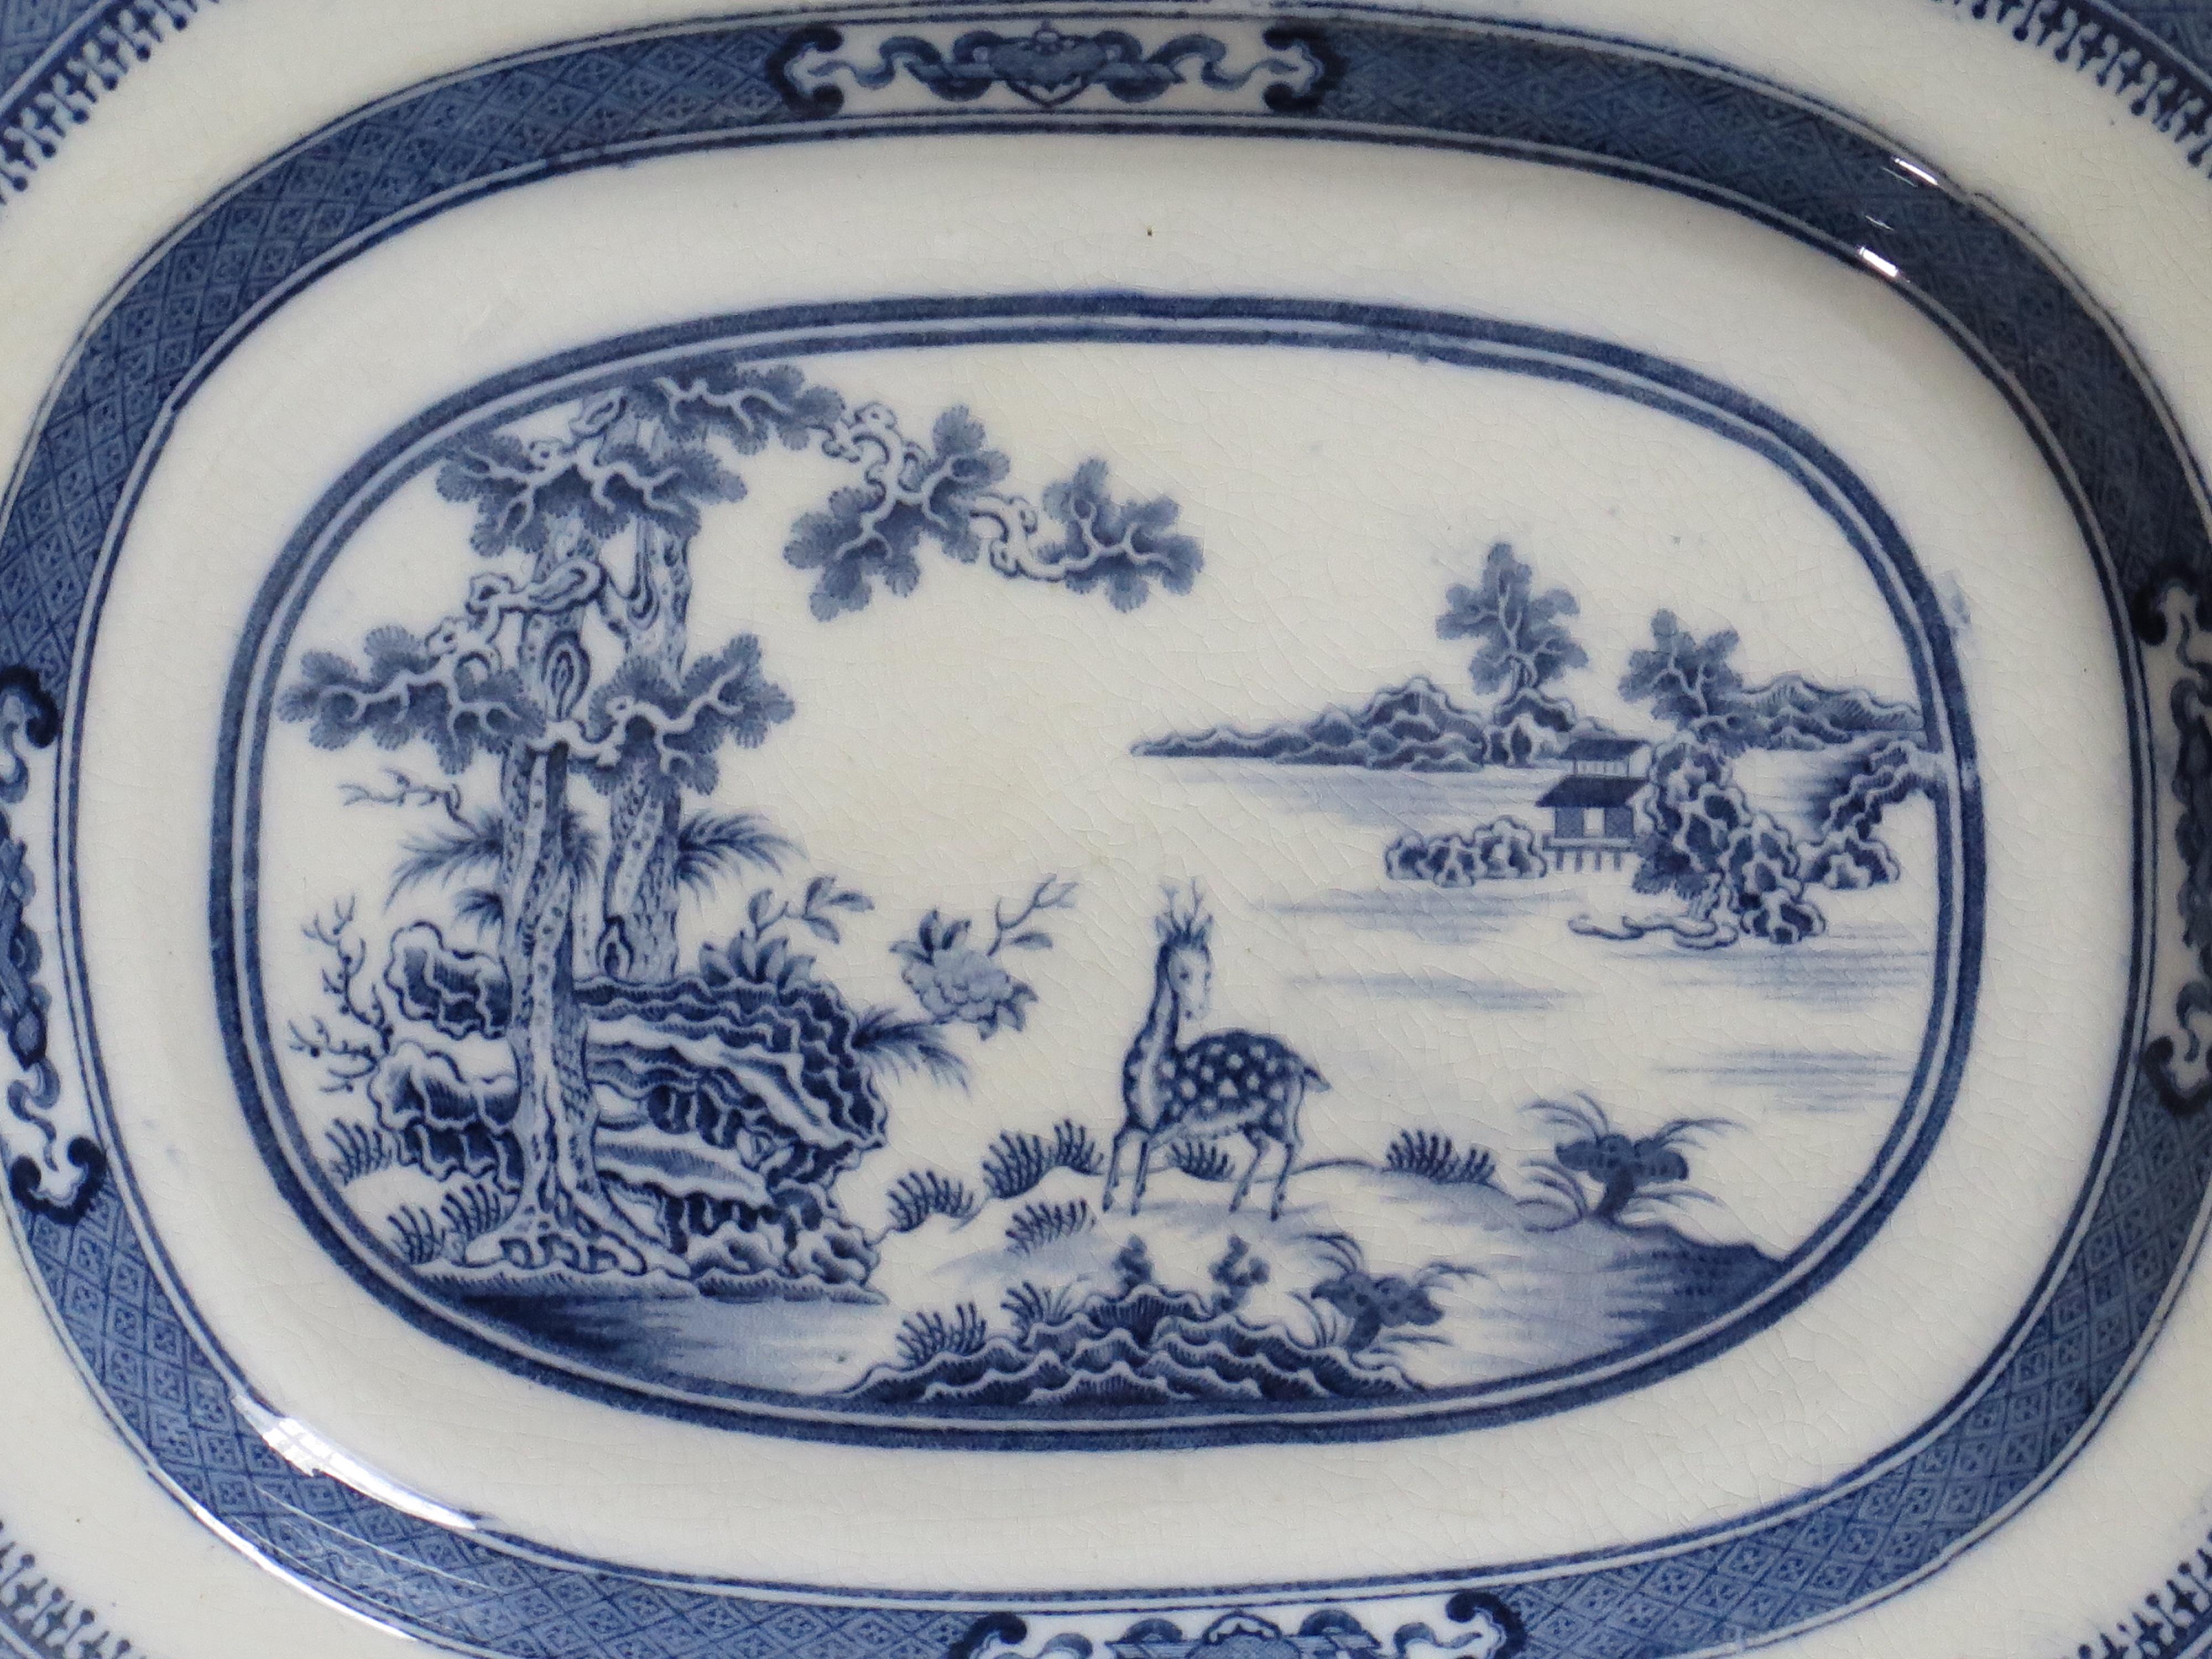 This is a good transfer printed blue and white Dish or Plate, made of a type of earthenware pottery called pearlware, in the early 19th century, that we attribute to a Staffordshire Potteries maker, circa 1820.

The landscape pattern has an